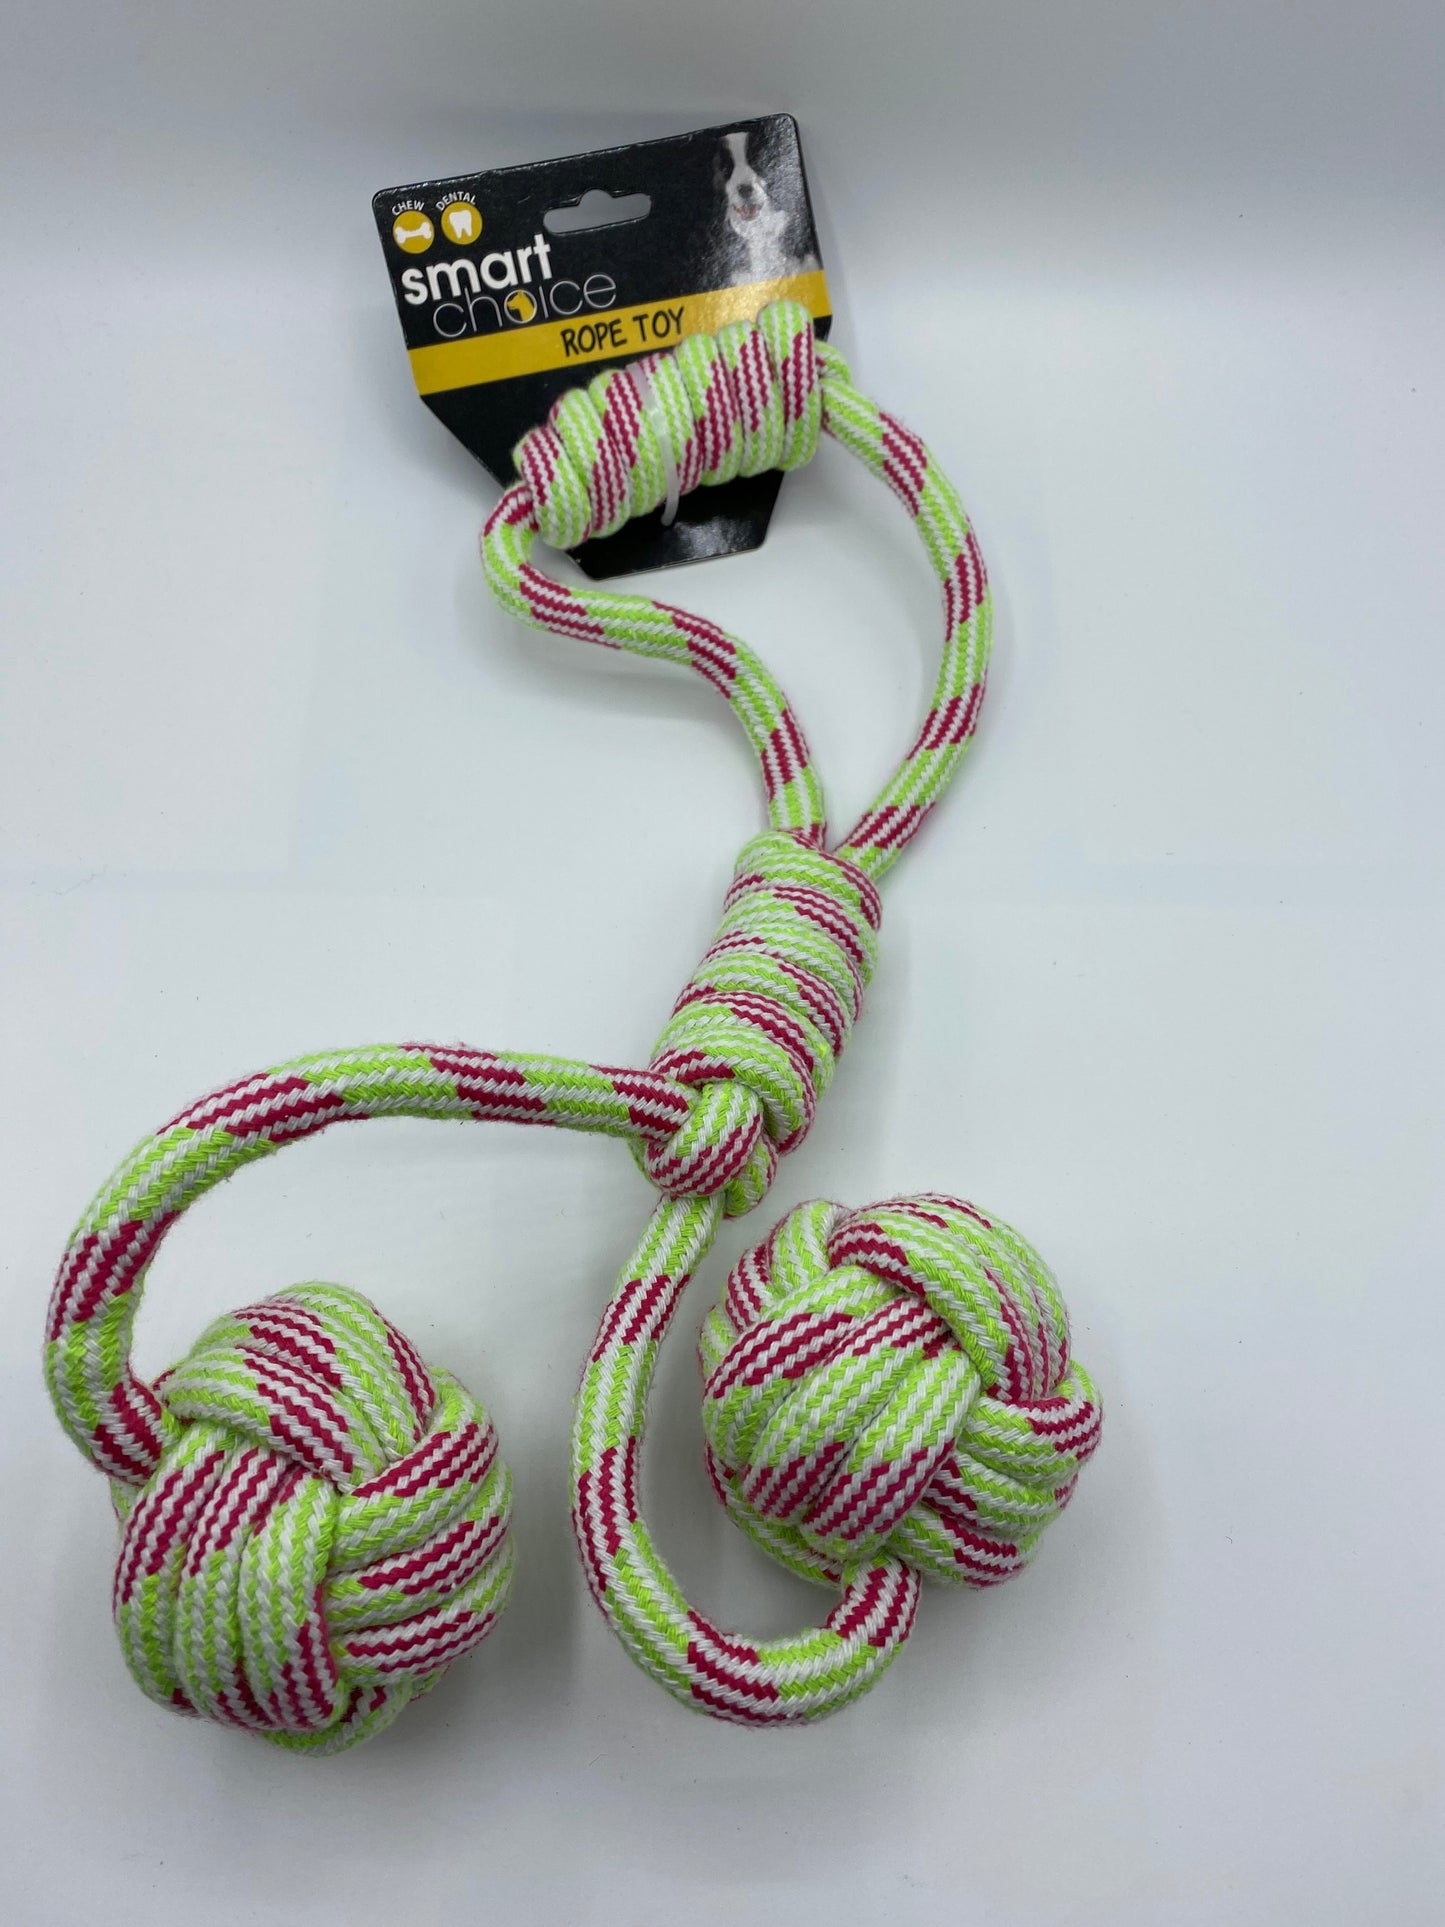 Knotted Rope with Two Balls Dog Toy 48cm Long Pink/Green and Blue/Yellow